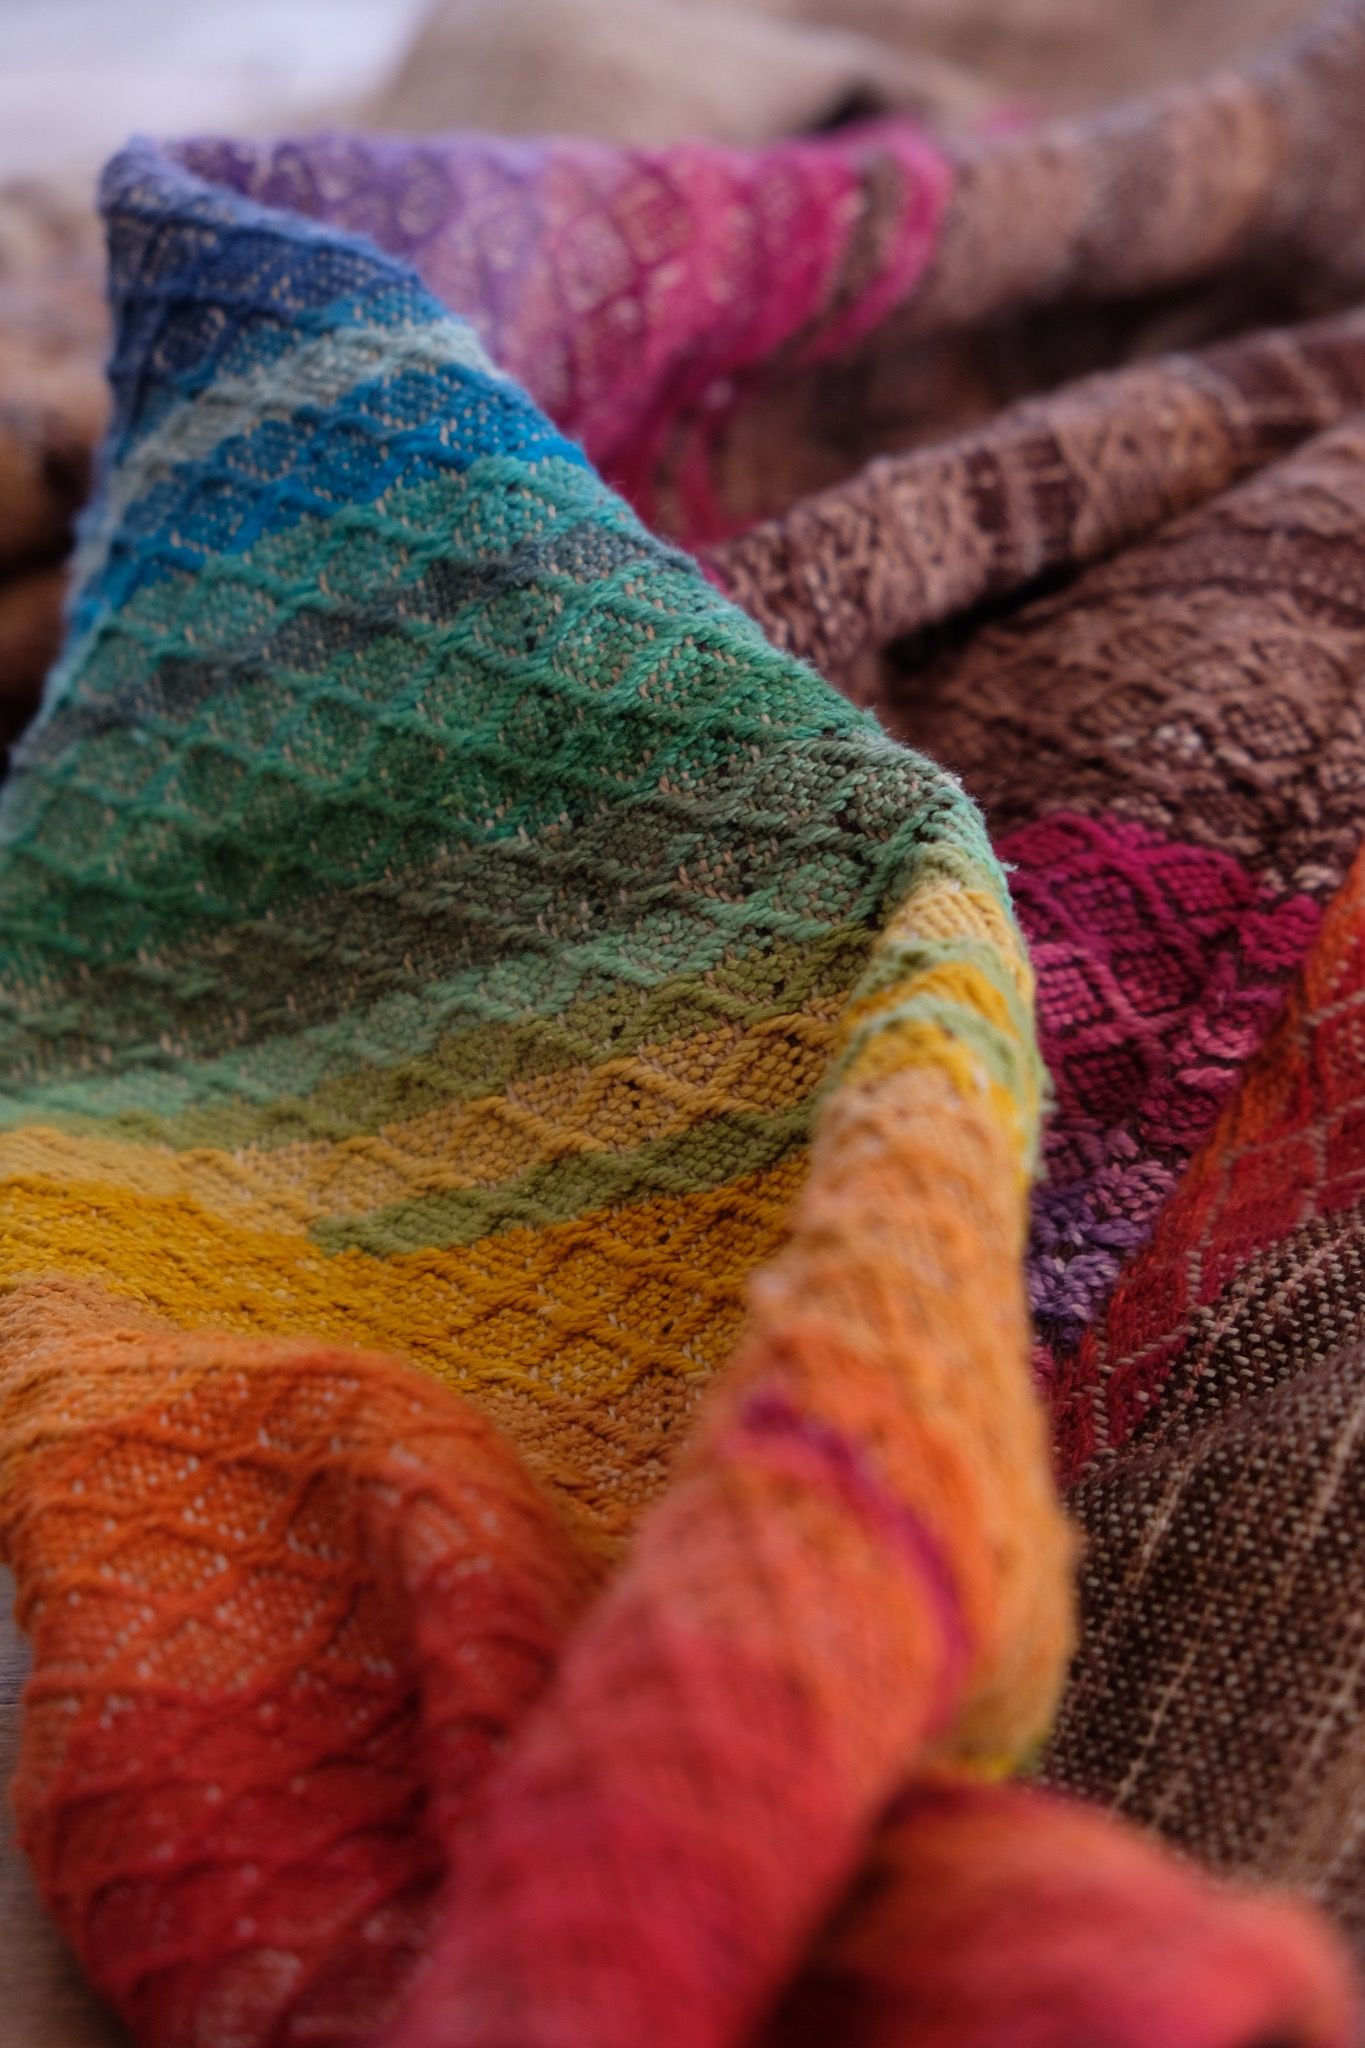 detail of handwoven fabric with textured diamond weave in rainbow colors with browns and tans